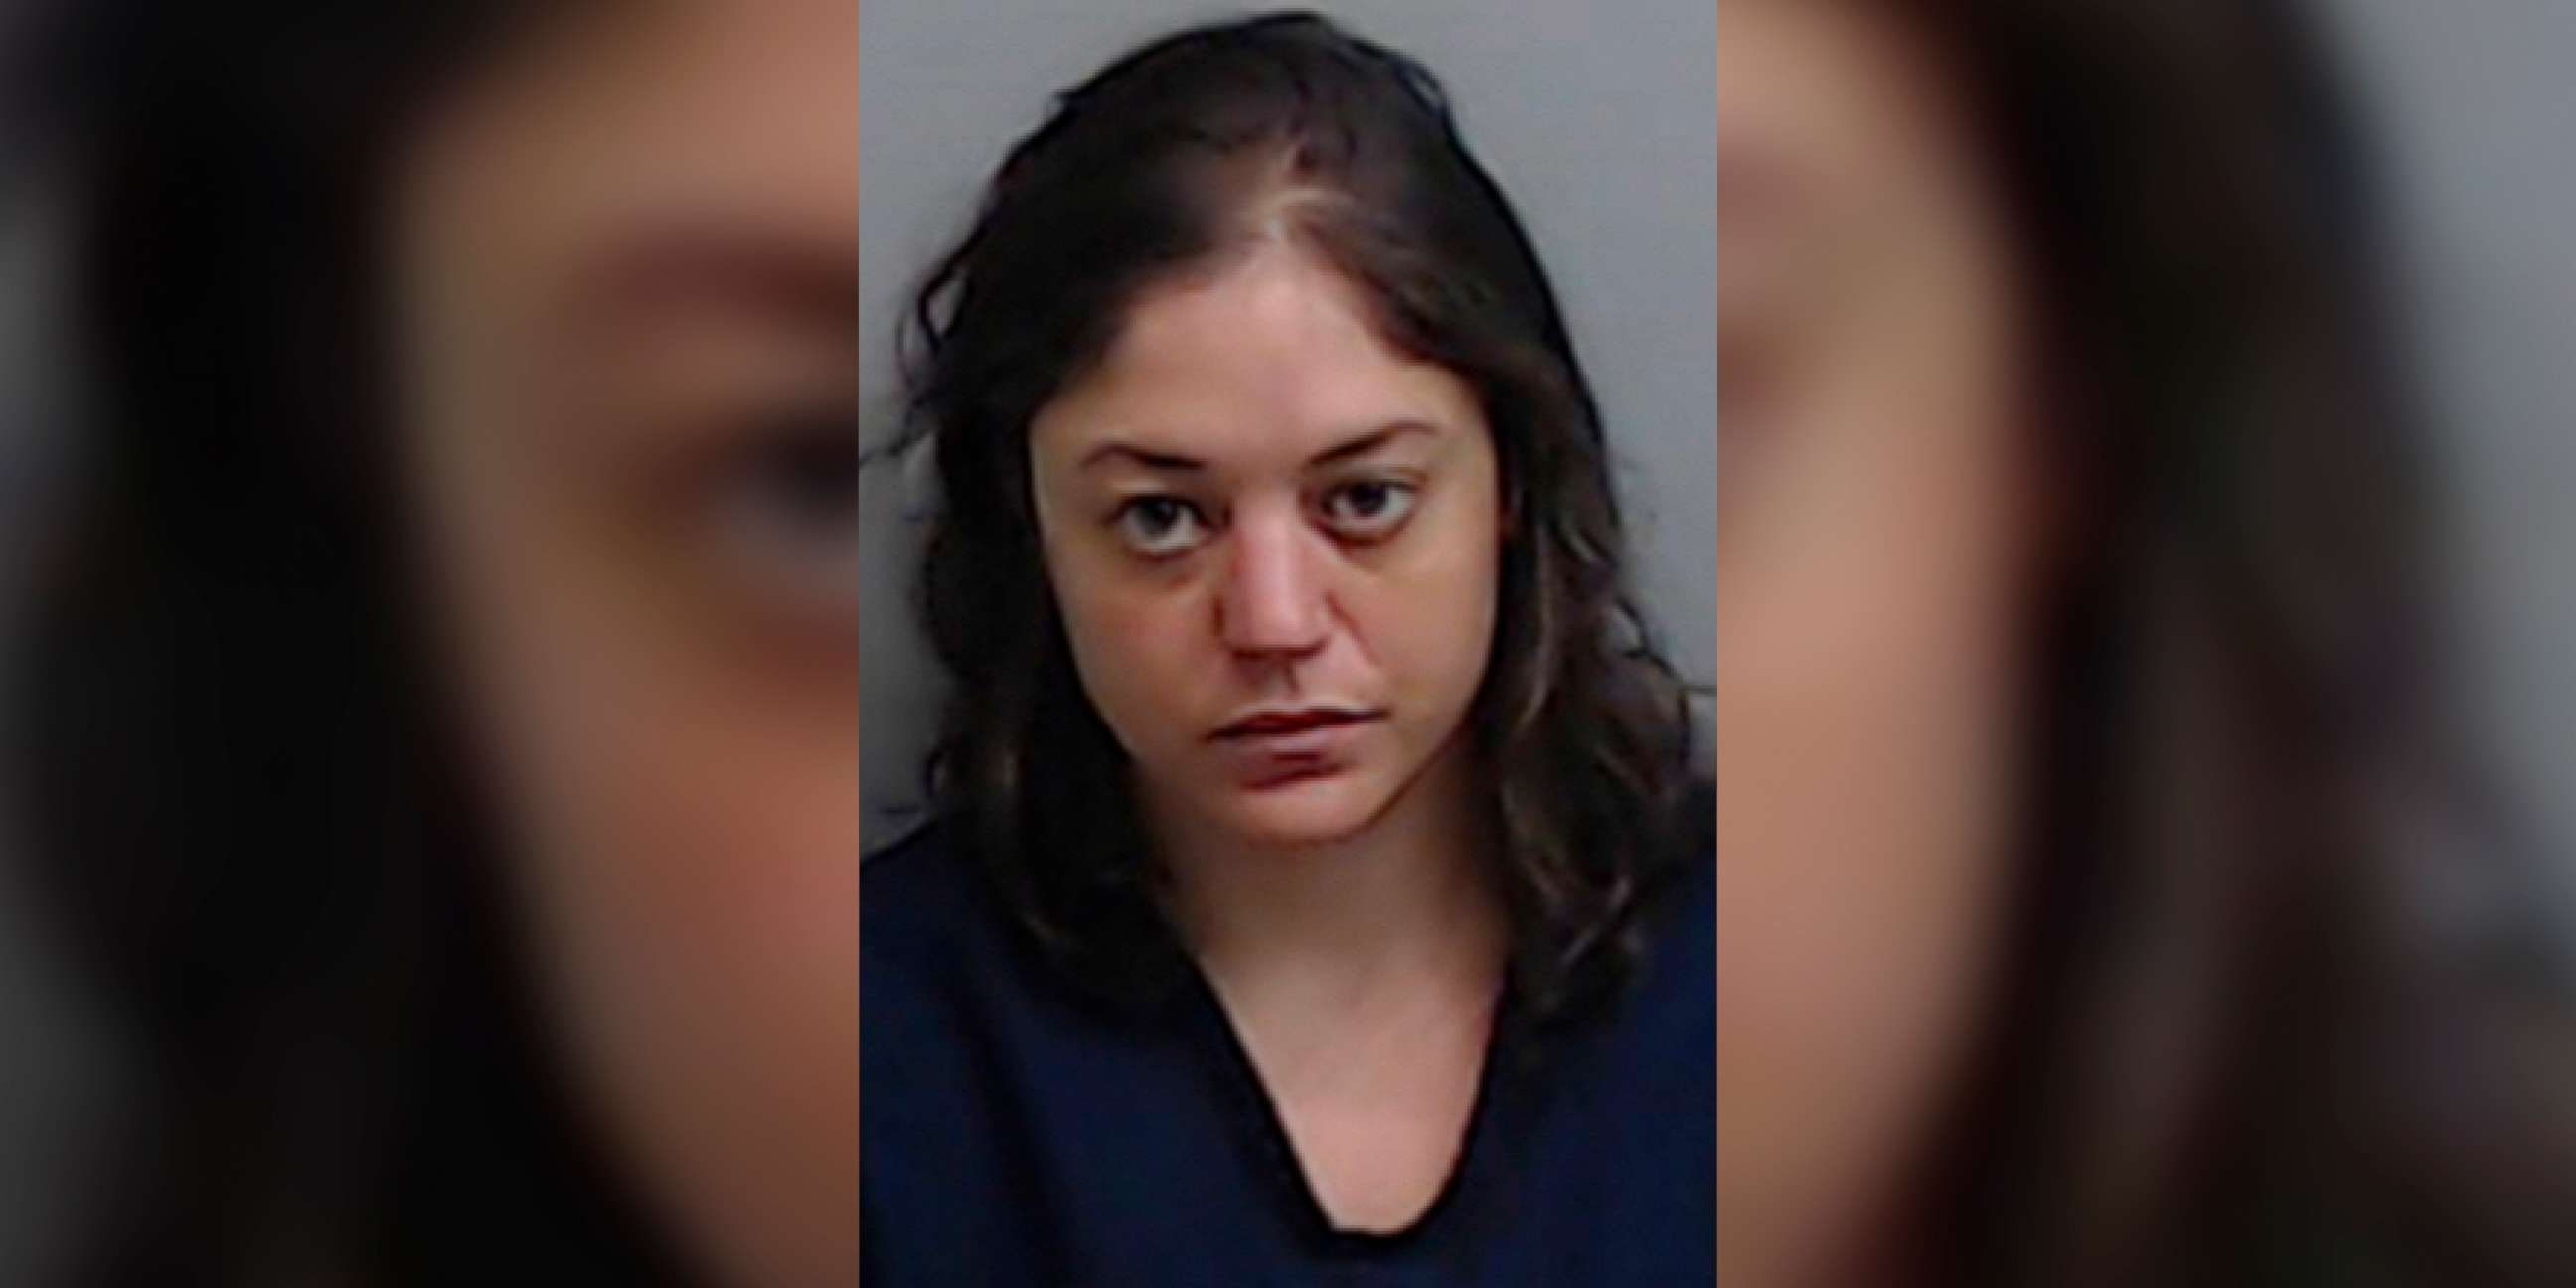 PHOTO: This booking photo released by the Fulton County, Ga., Jail shows Natalie White, who was charged, June 23, 2020, with first degree arson in the burning of an Atlanta Wendy's in the wake of the Rayshard Brooks shooting.